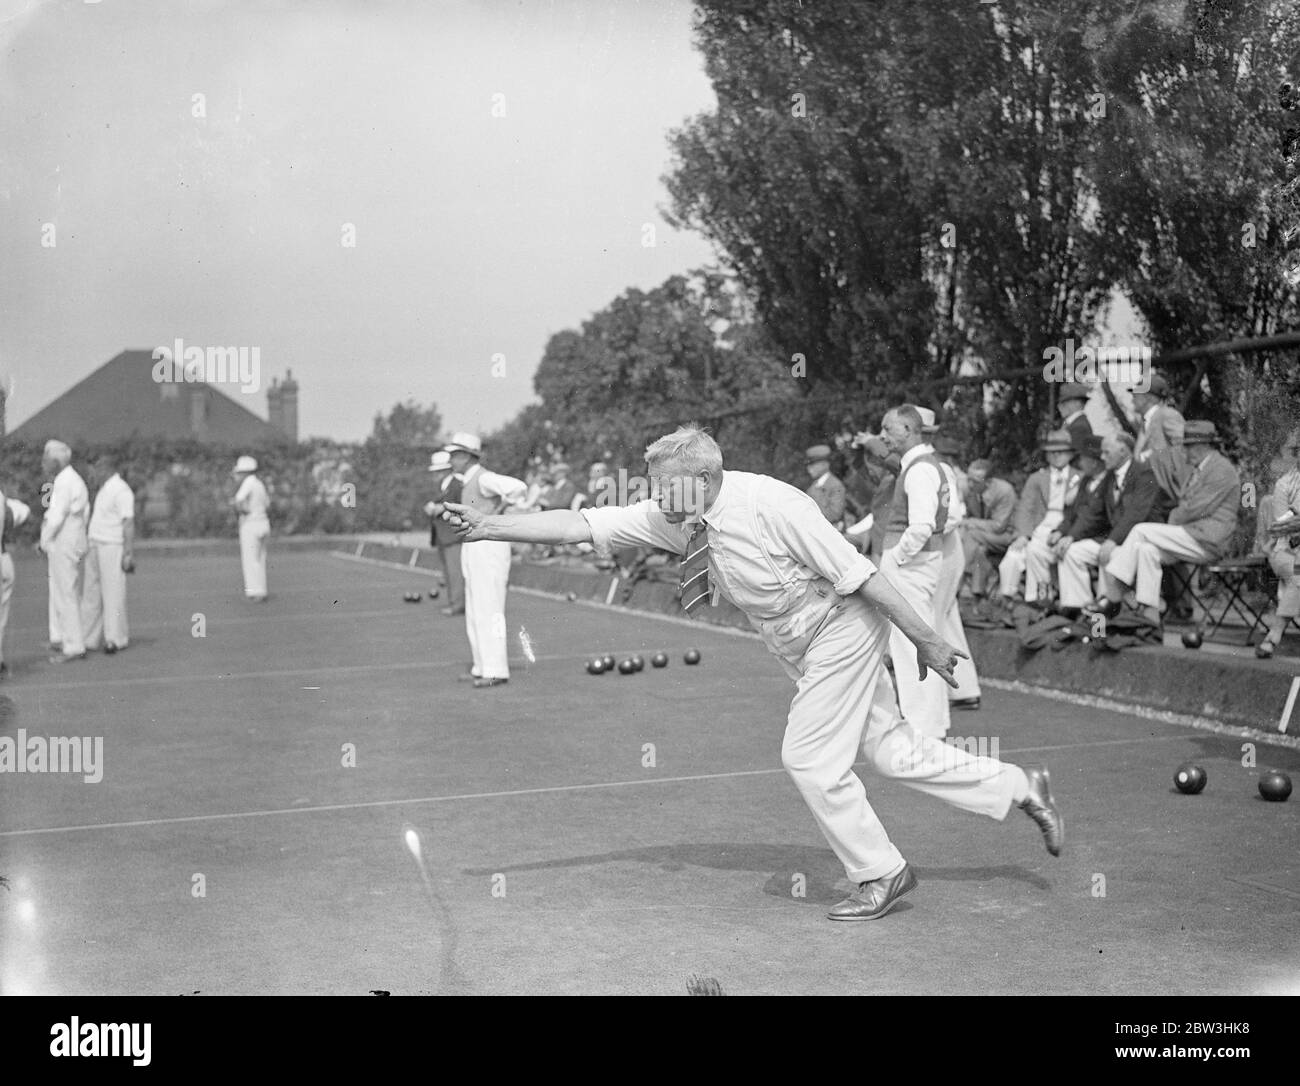 National Amateur Bowling Championships Open In London . The English Bowling Association ' s Amateur National Championships for 1936 have opened at the Temple Bowling Club , Denmark Hill , London . Three hundred and fourteen amateur bowlers - survivors of the qualifying rounds - are competing in the in the 27th championship meeting . Photo shows : Mr . H . Taylor of Faversham in an  action  attitude as he follows his wood when playing against Shirley Park ( Surrey ) . 10 Aug 1936 Stock Photo